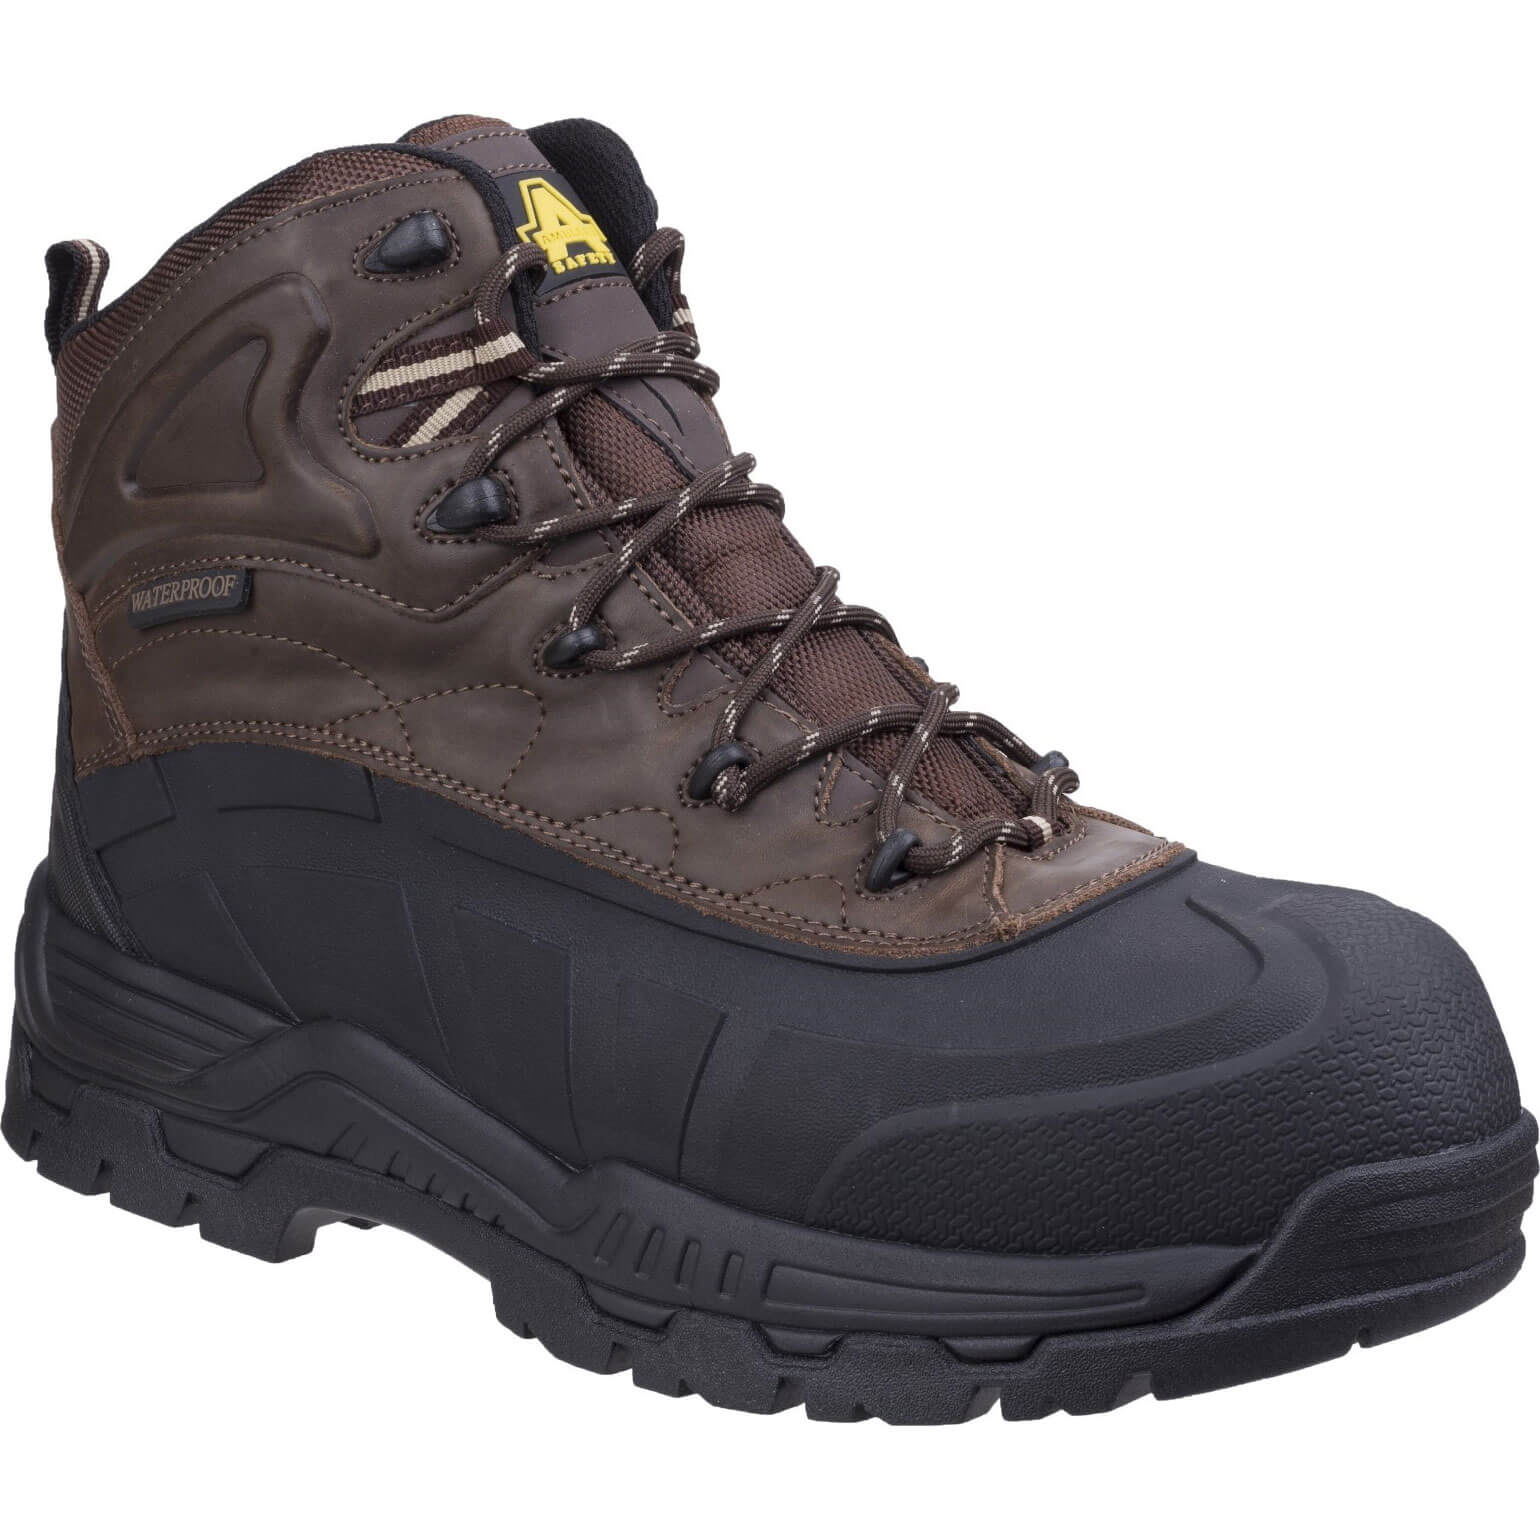 Image of Amblers Safety FS430 Orca Safety Boot Brown Size 12